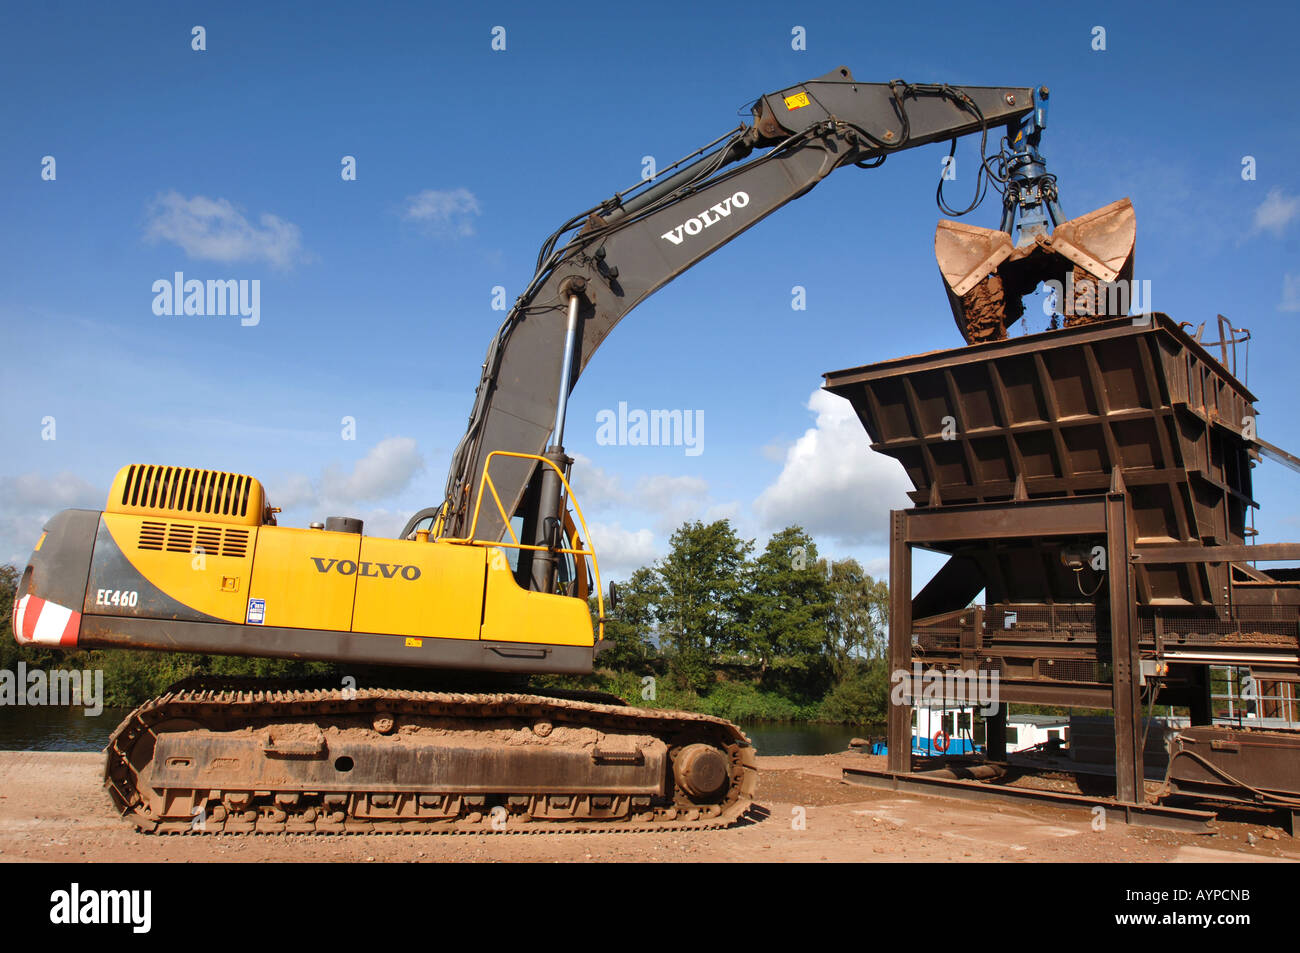 Cemex Sand High Resolution Stock Photography and Images - Alamy